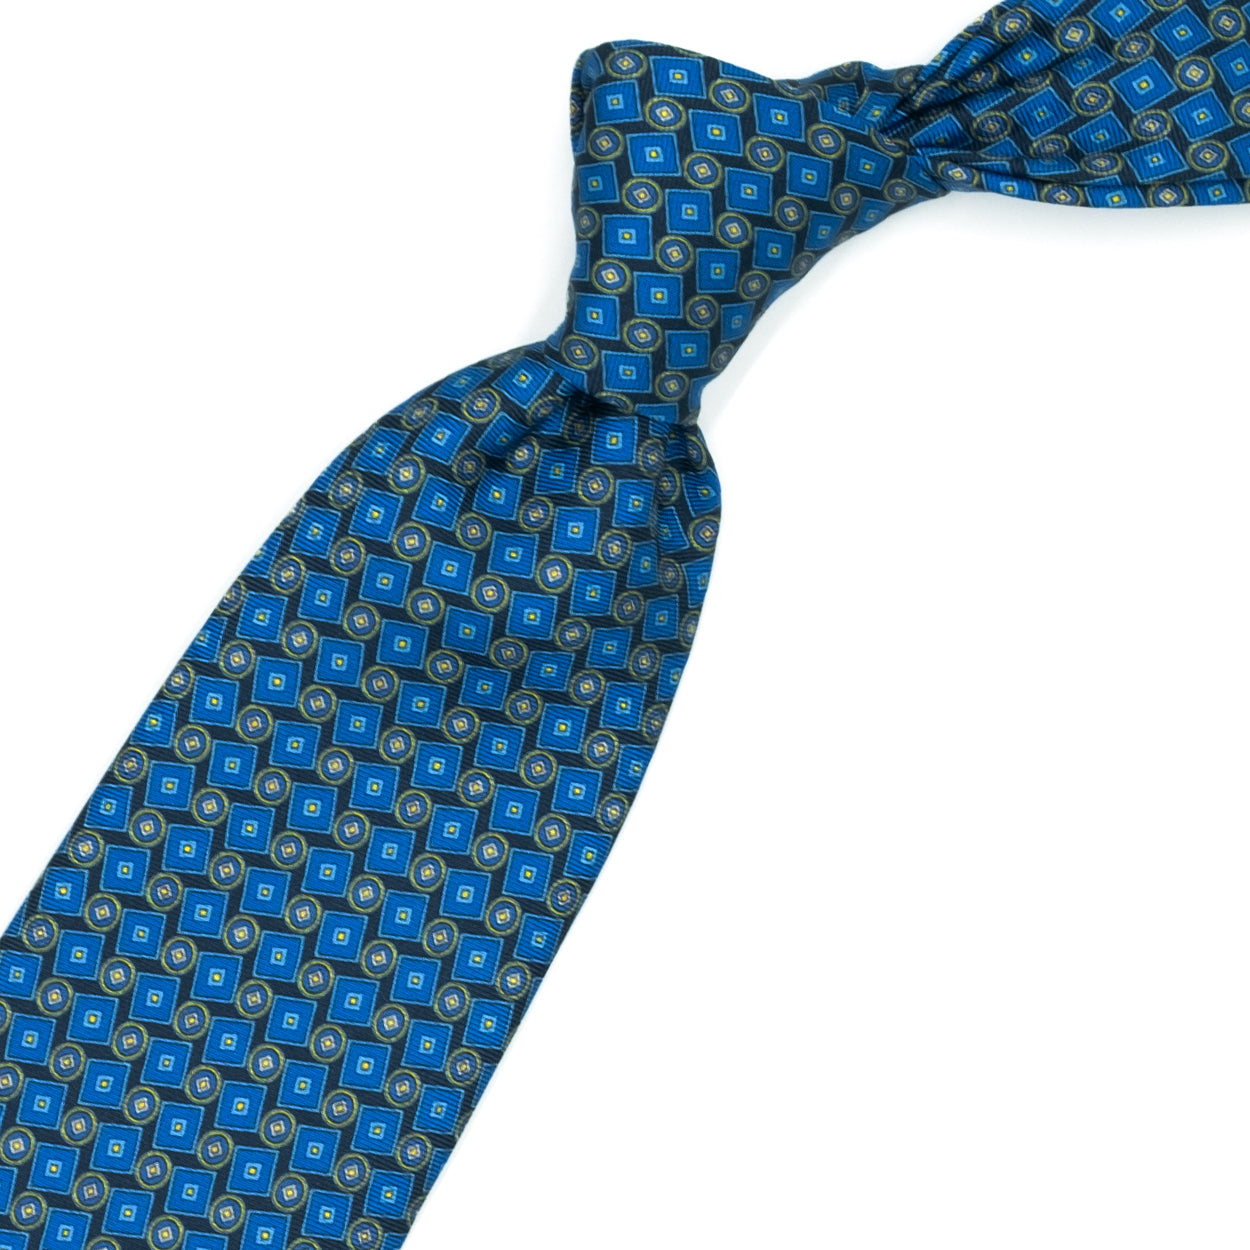 Blue tie with blue circles and squares